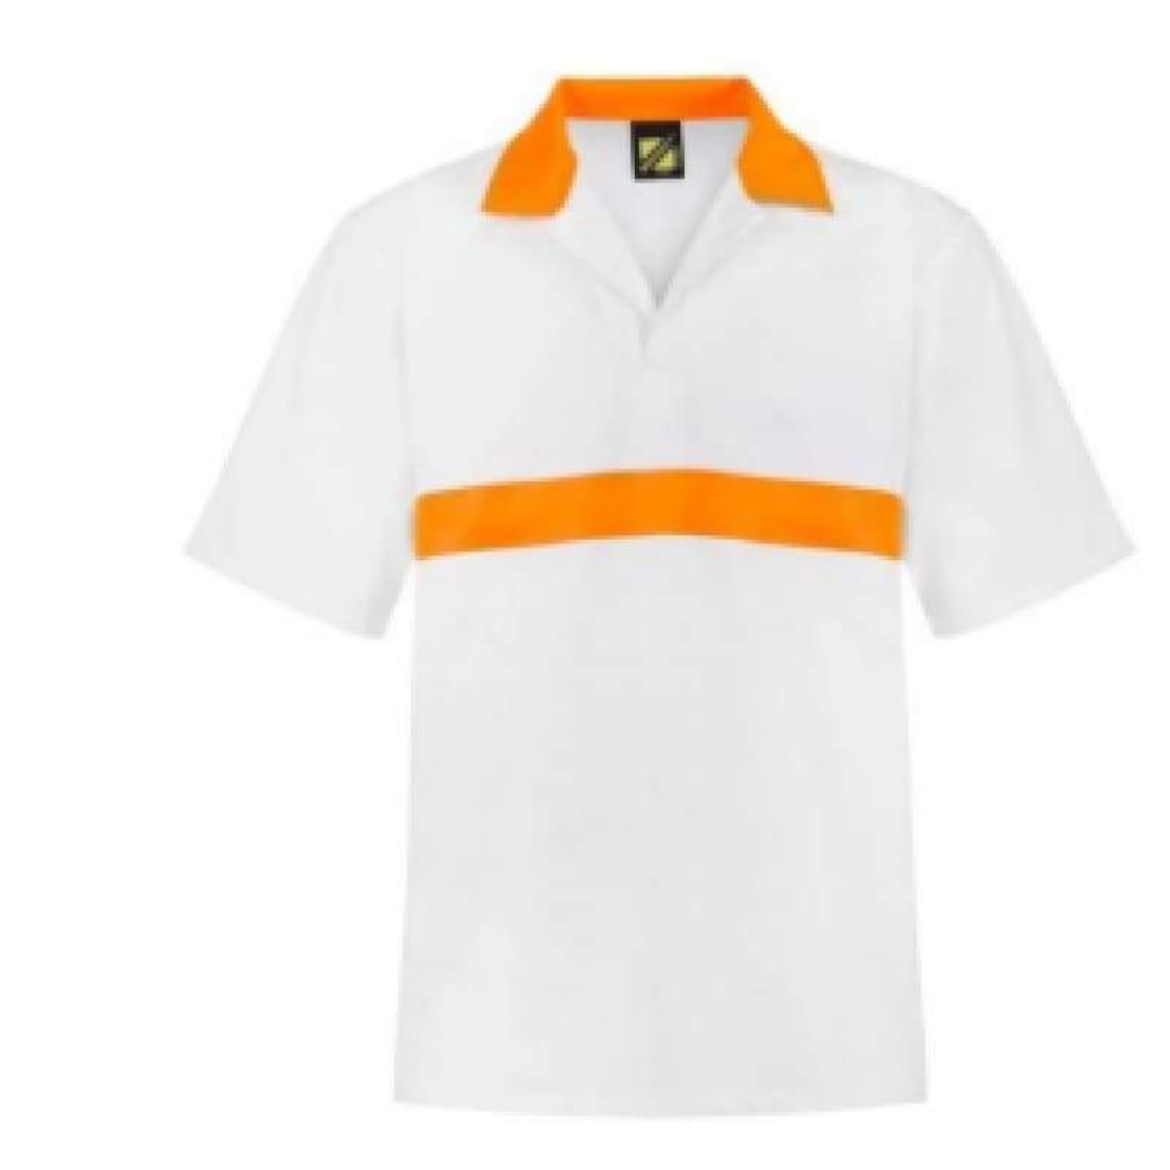 Picture of WorkCraft, Food Industry Jac Shirt, Contrast Collar and Chestband, Short Sleeve